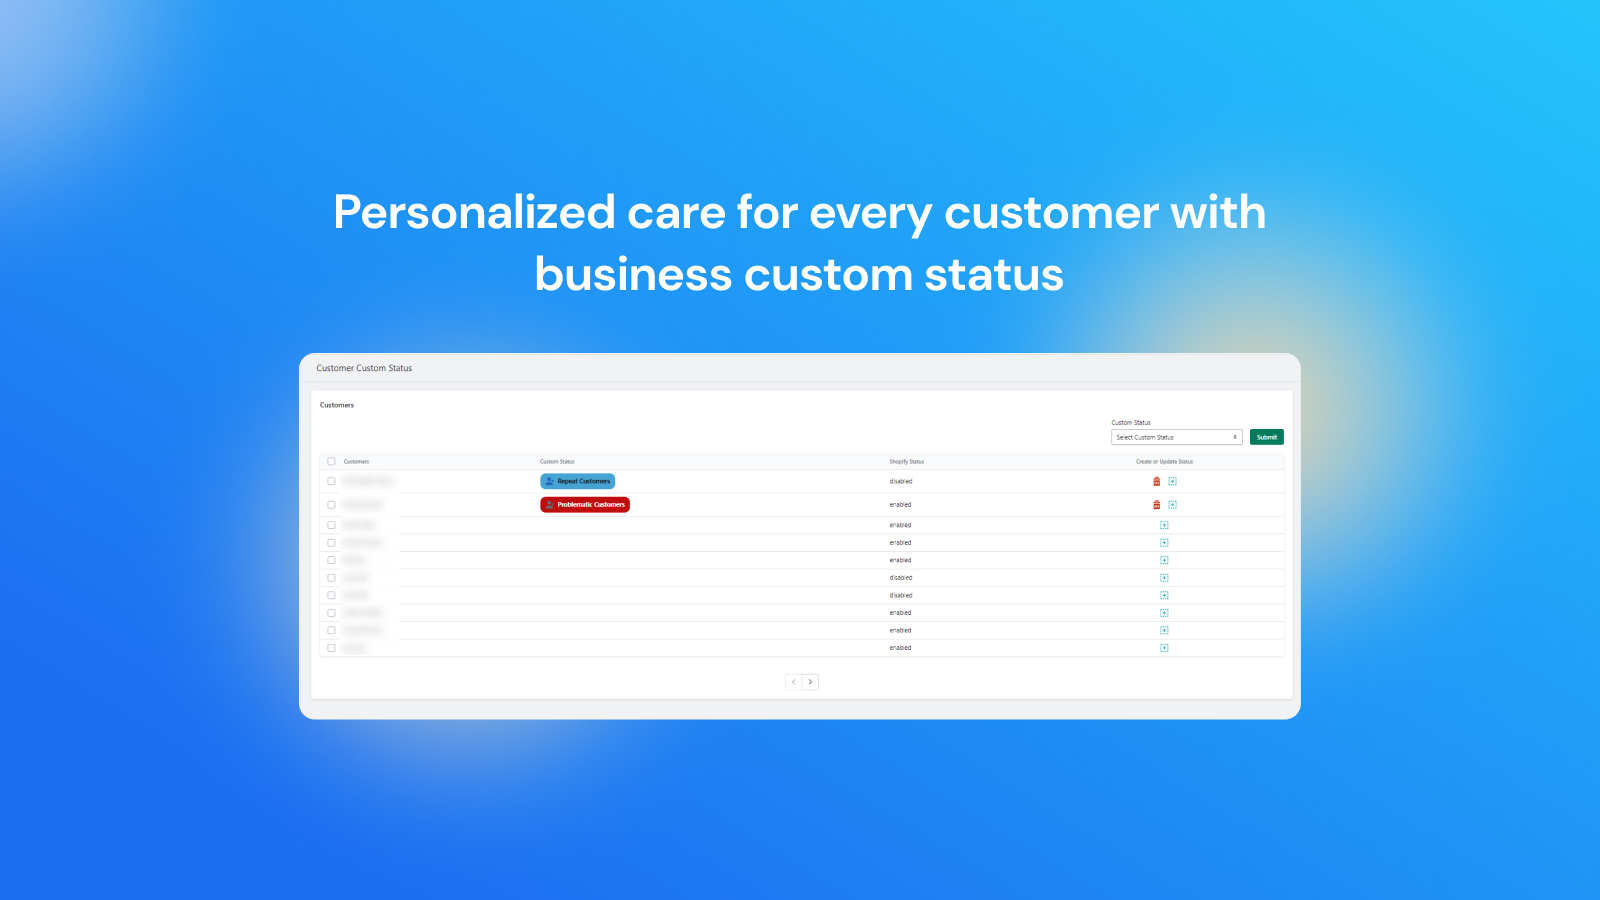 Personalized care for every customer with business custom status